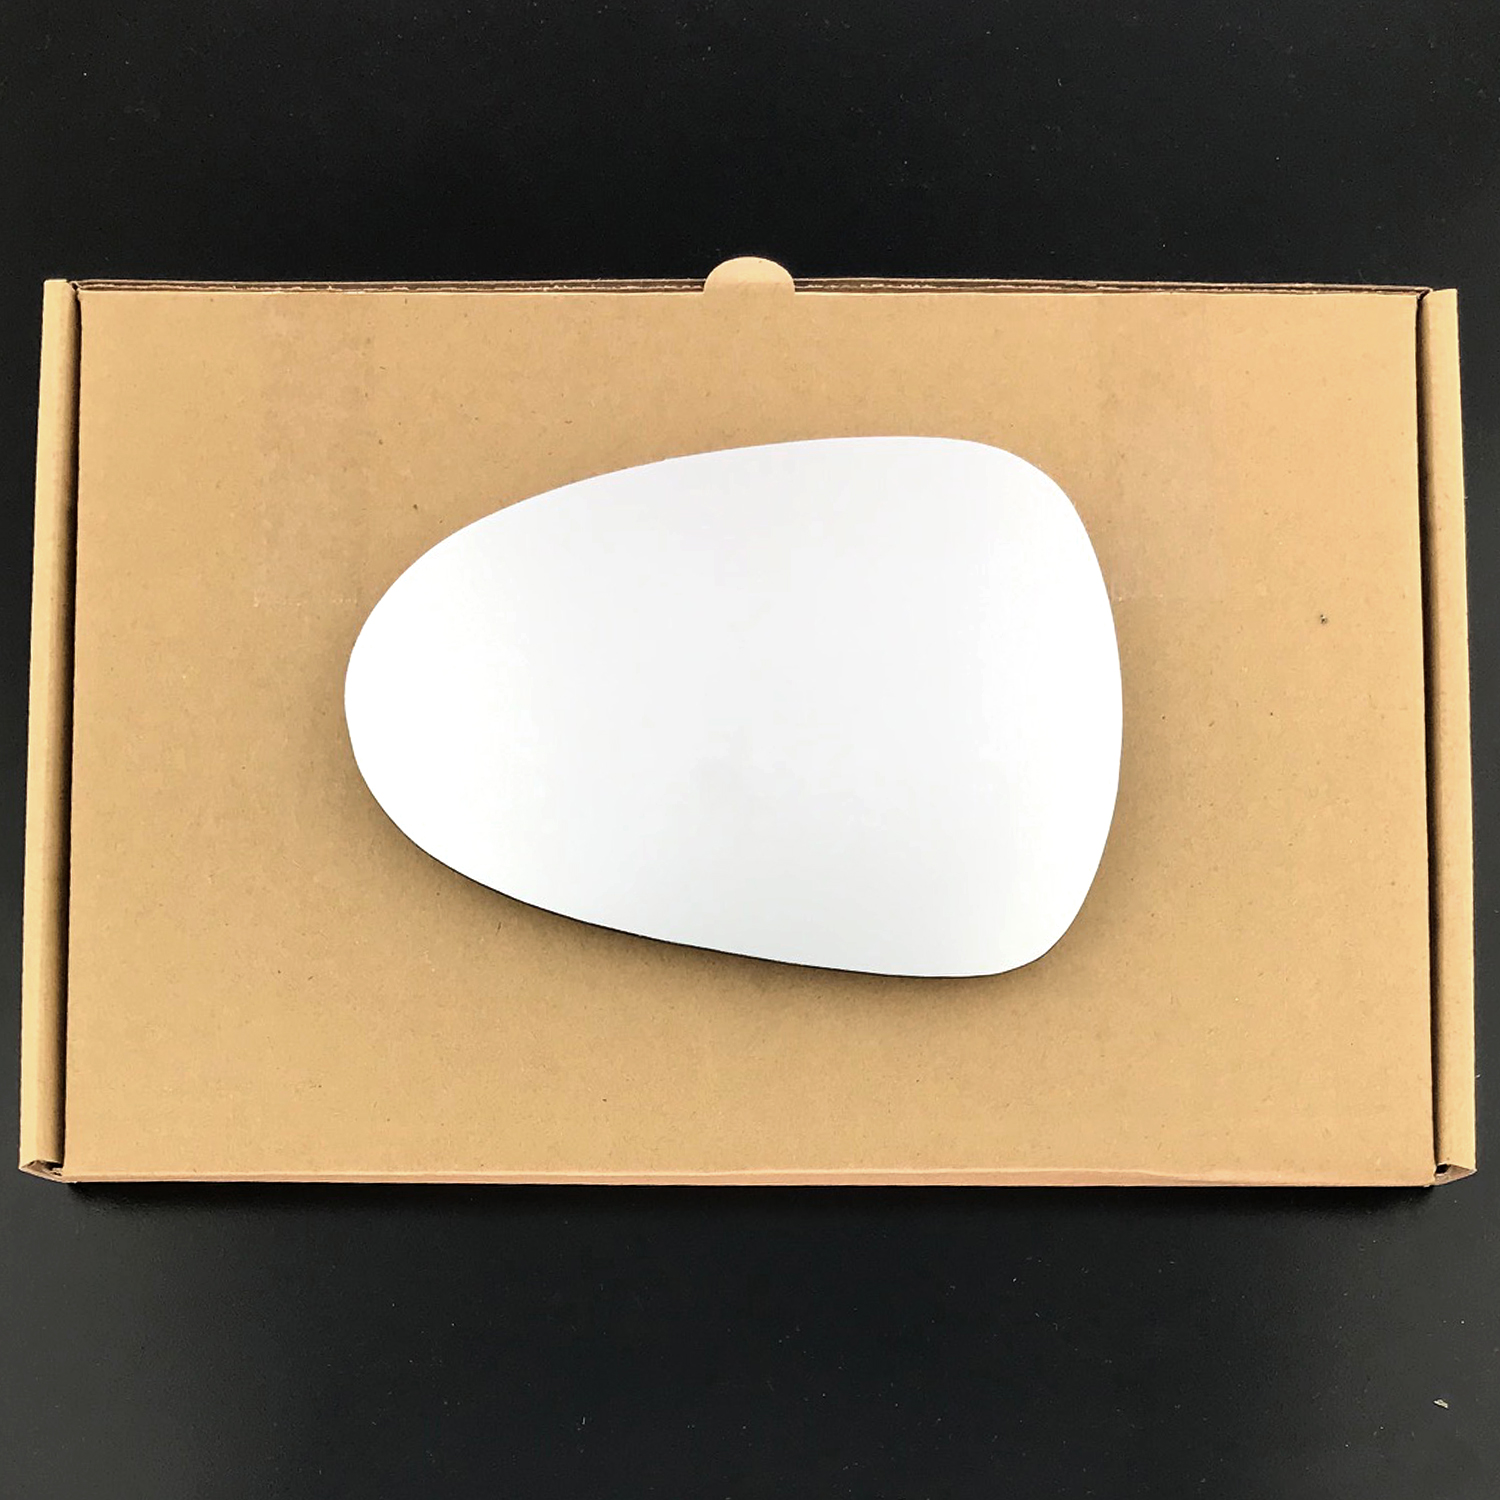 SEAT Exeo Wing Mirror Glass LEFT HAND ( UK Passenger Side ) 2009 to 2018 – Convex Wing Mirror